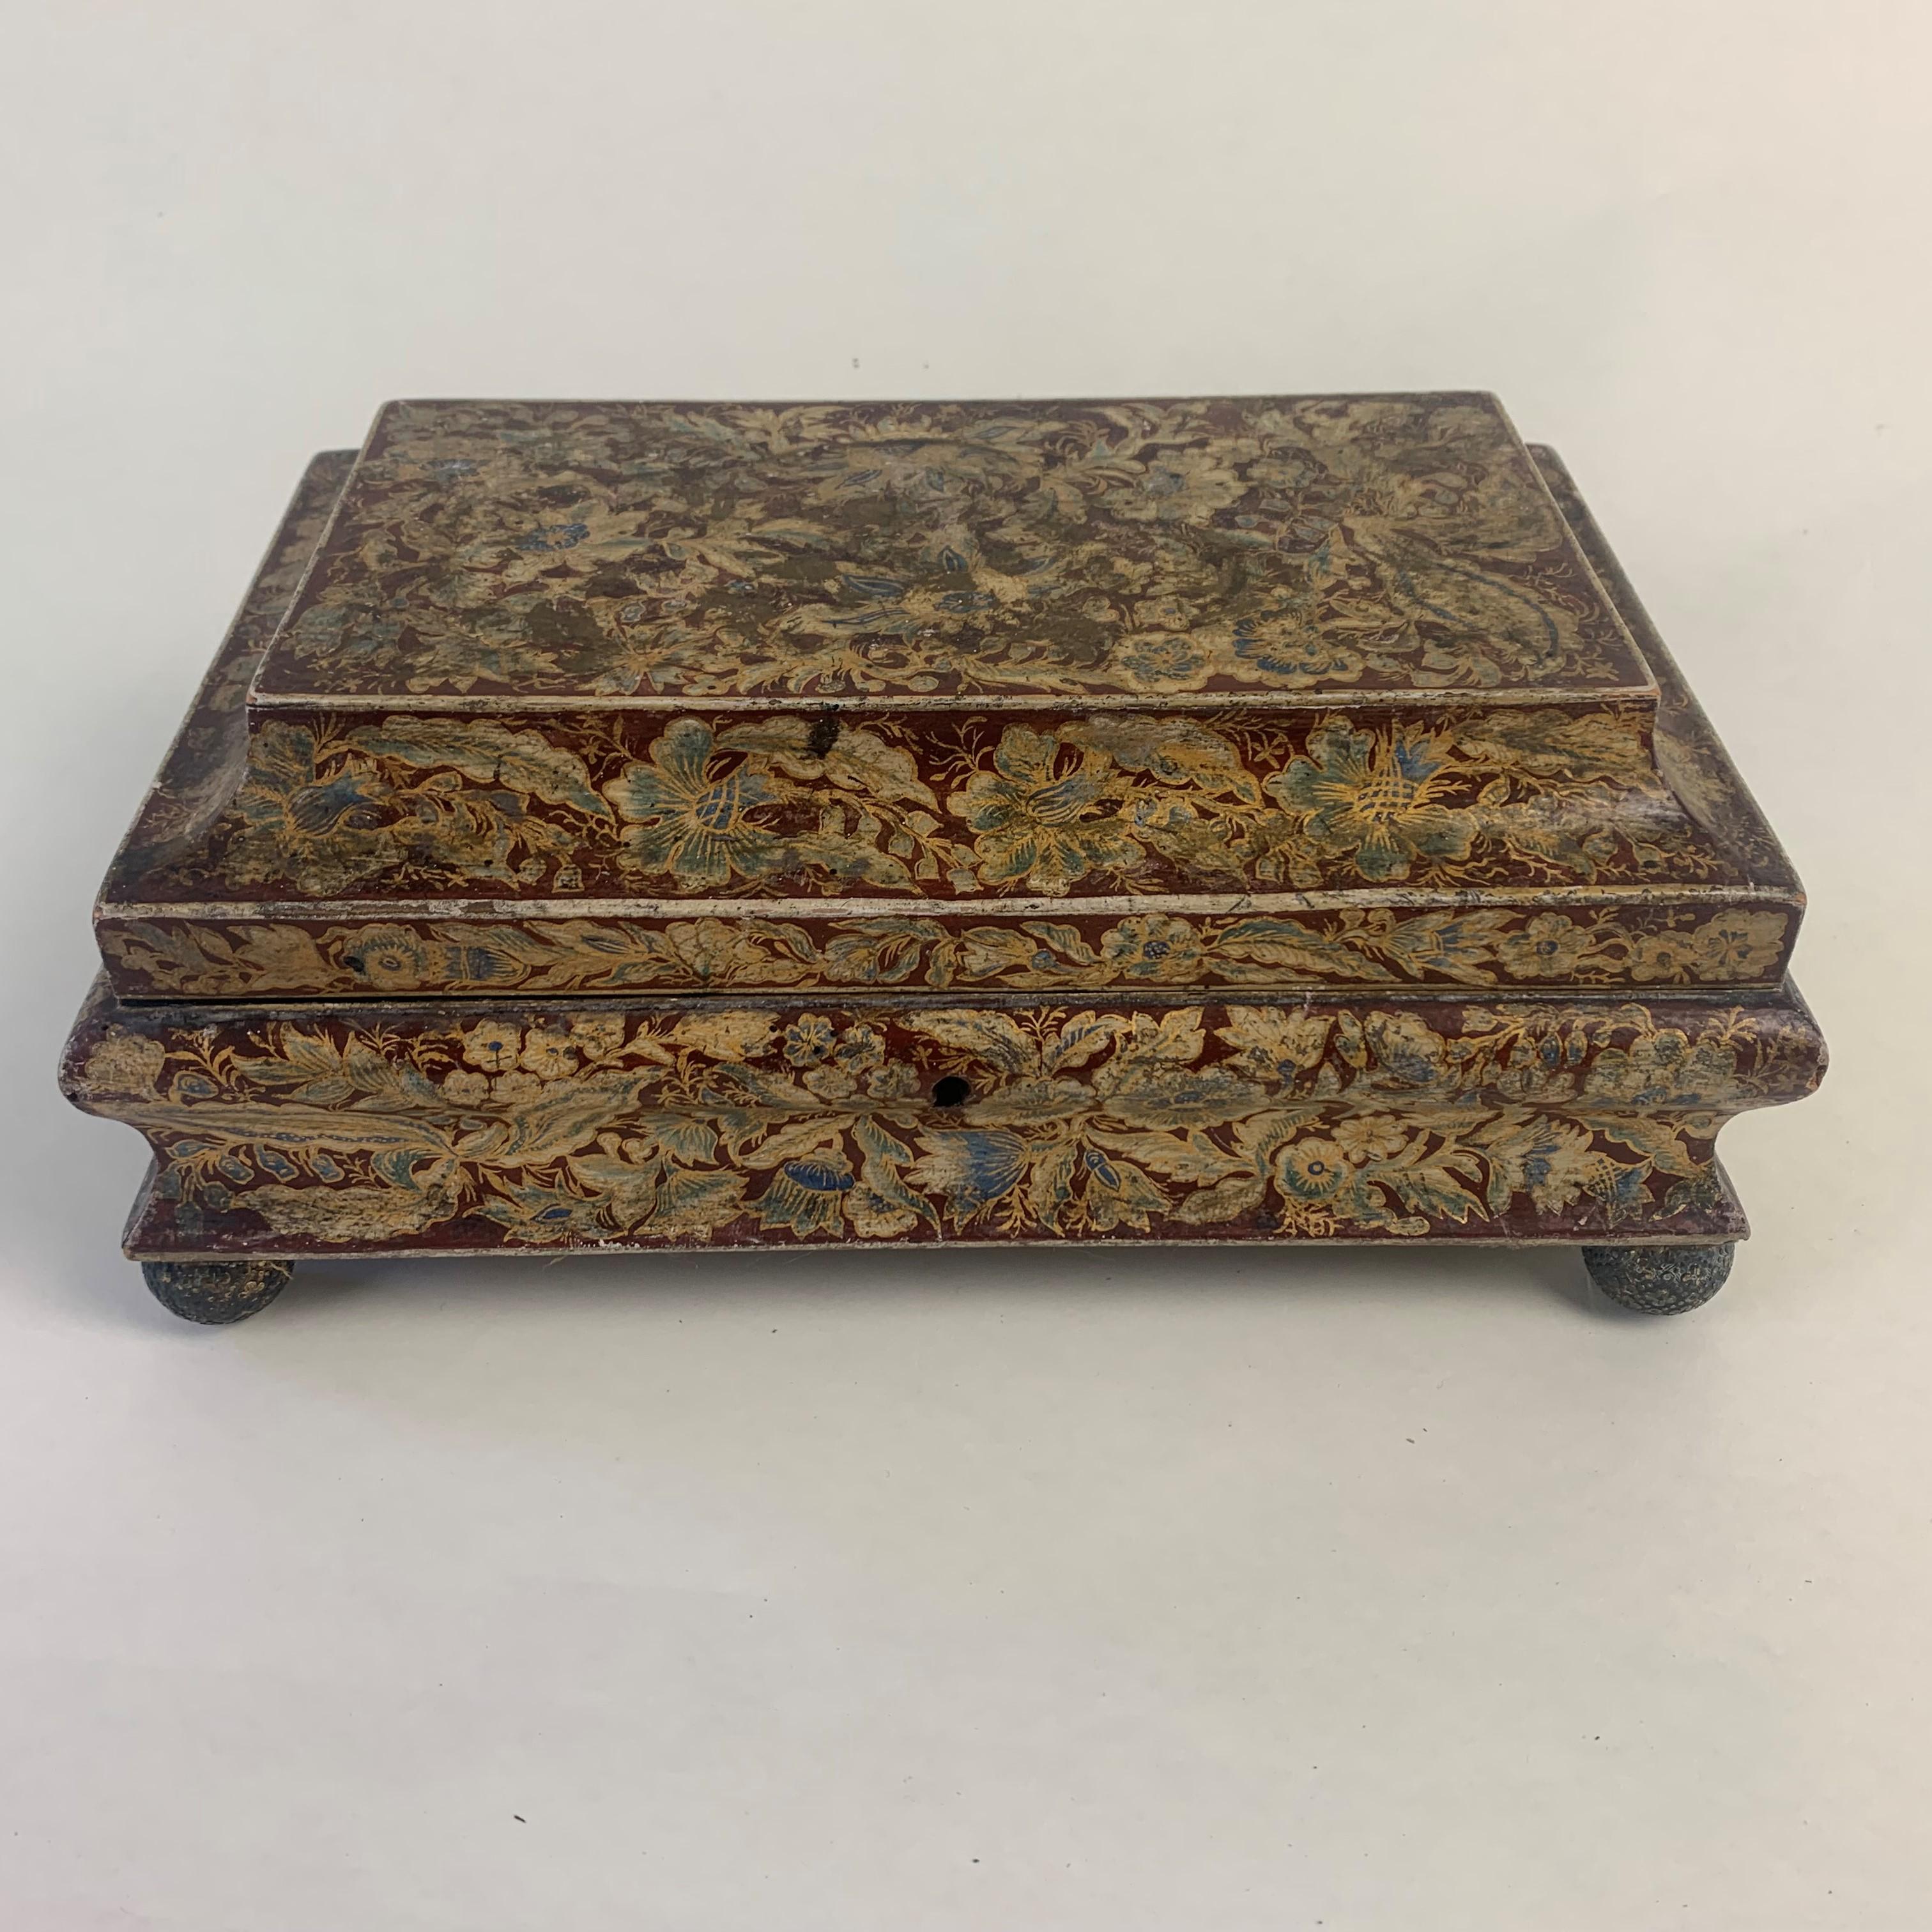 Superb quality Regency period hand painted card box of shaped form, profusely decorated all over with gold and blue leaves and flowers on a scarlet ground and standing on gold ball feet. The interior lined with the original green sugar paper with